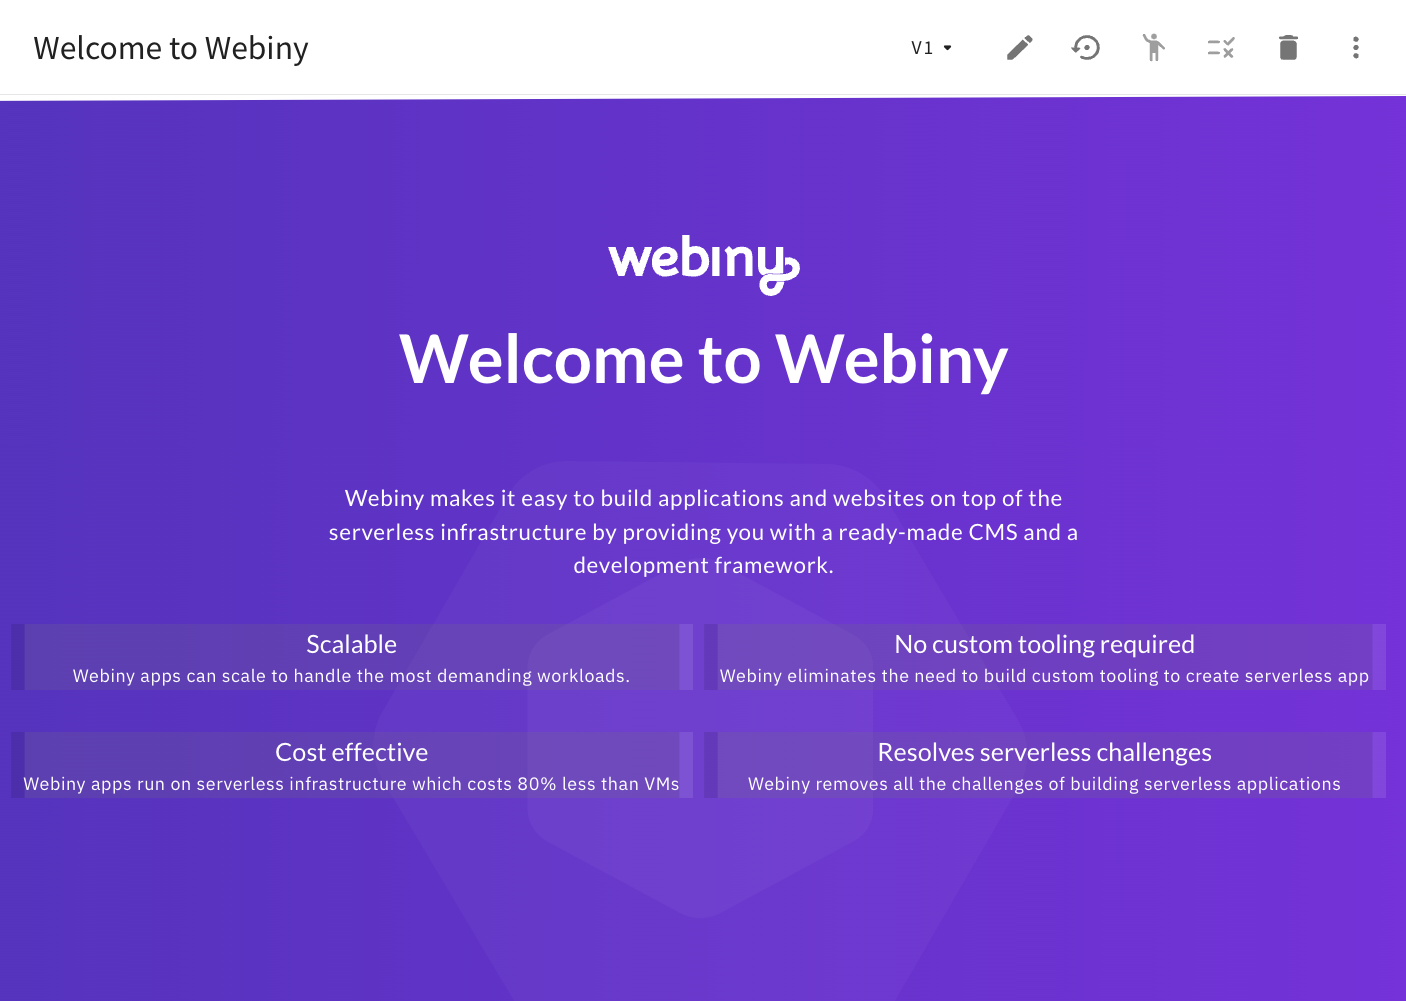 Welcome To Webiny Page - Before the Performed Migration Steps